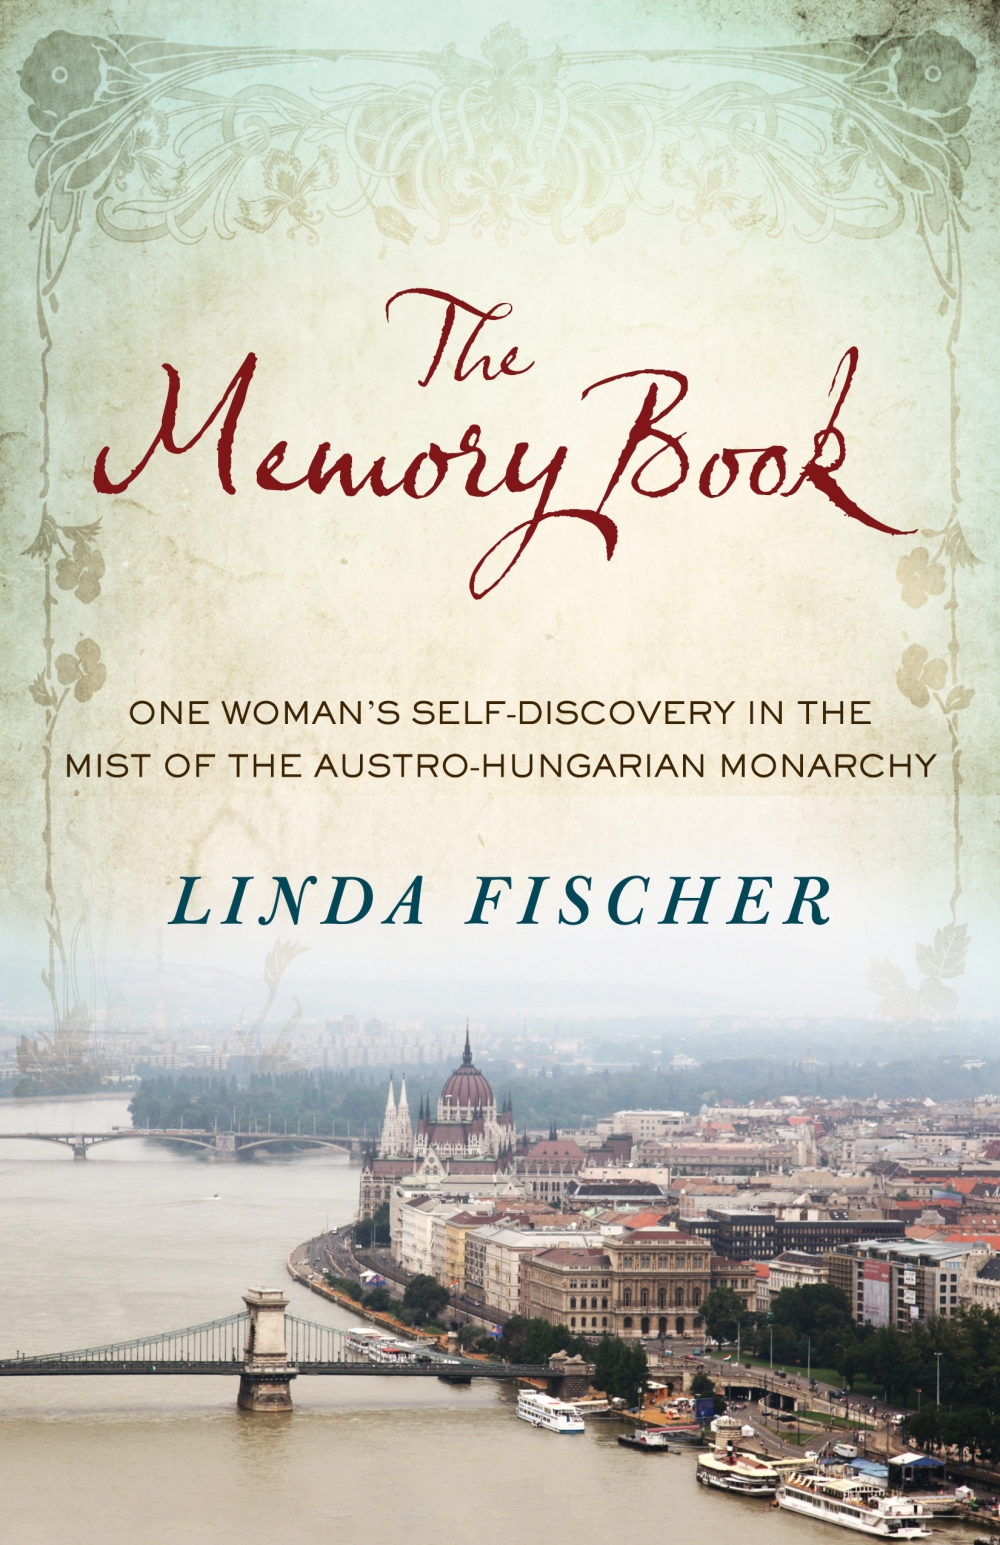 Review of The Memory Book (9780974428734) — Foreword Reviews